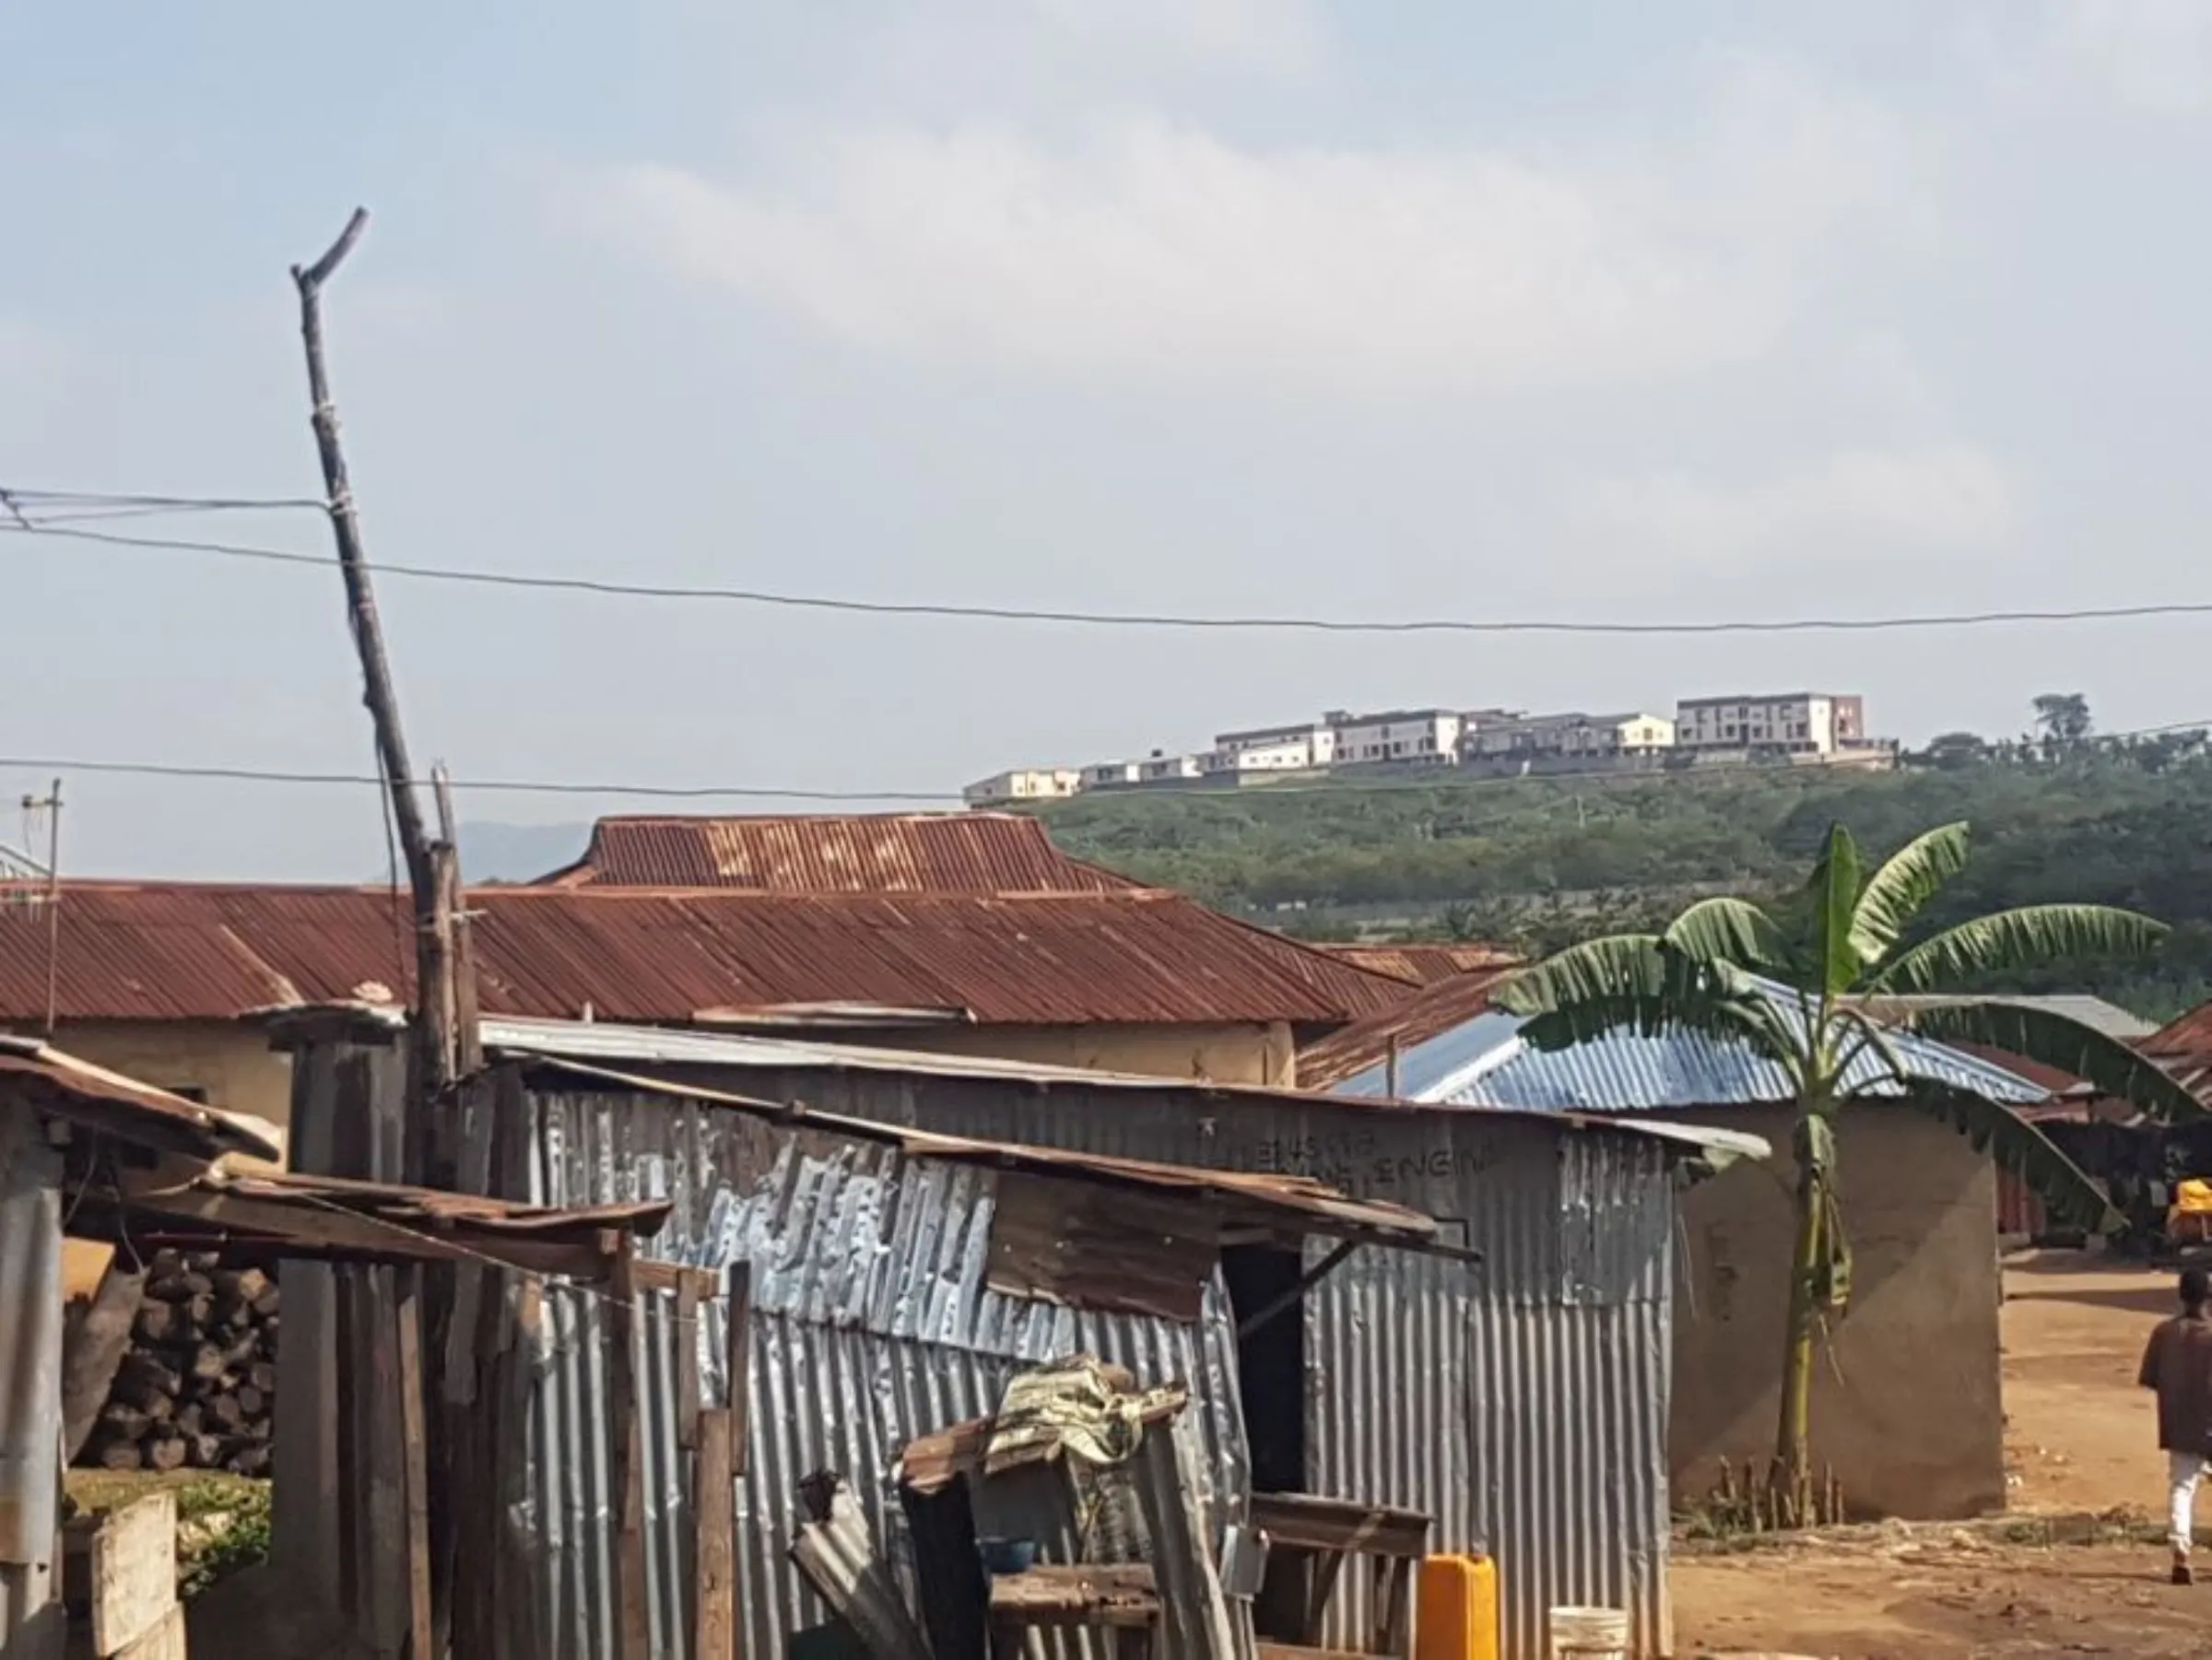 Houses below high-rise apartments in Abuja's Big Bola slum, built with corrugated iron sheets beside dirty water channels in Abuja, Nigeria. October 26, 2022.